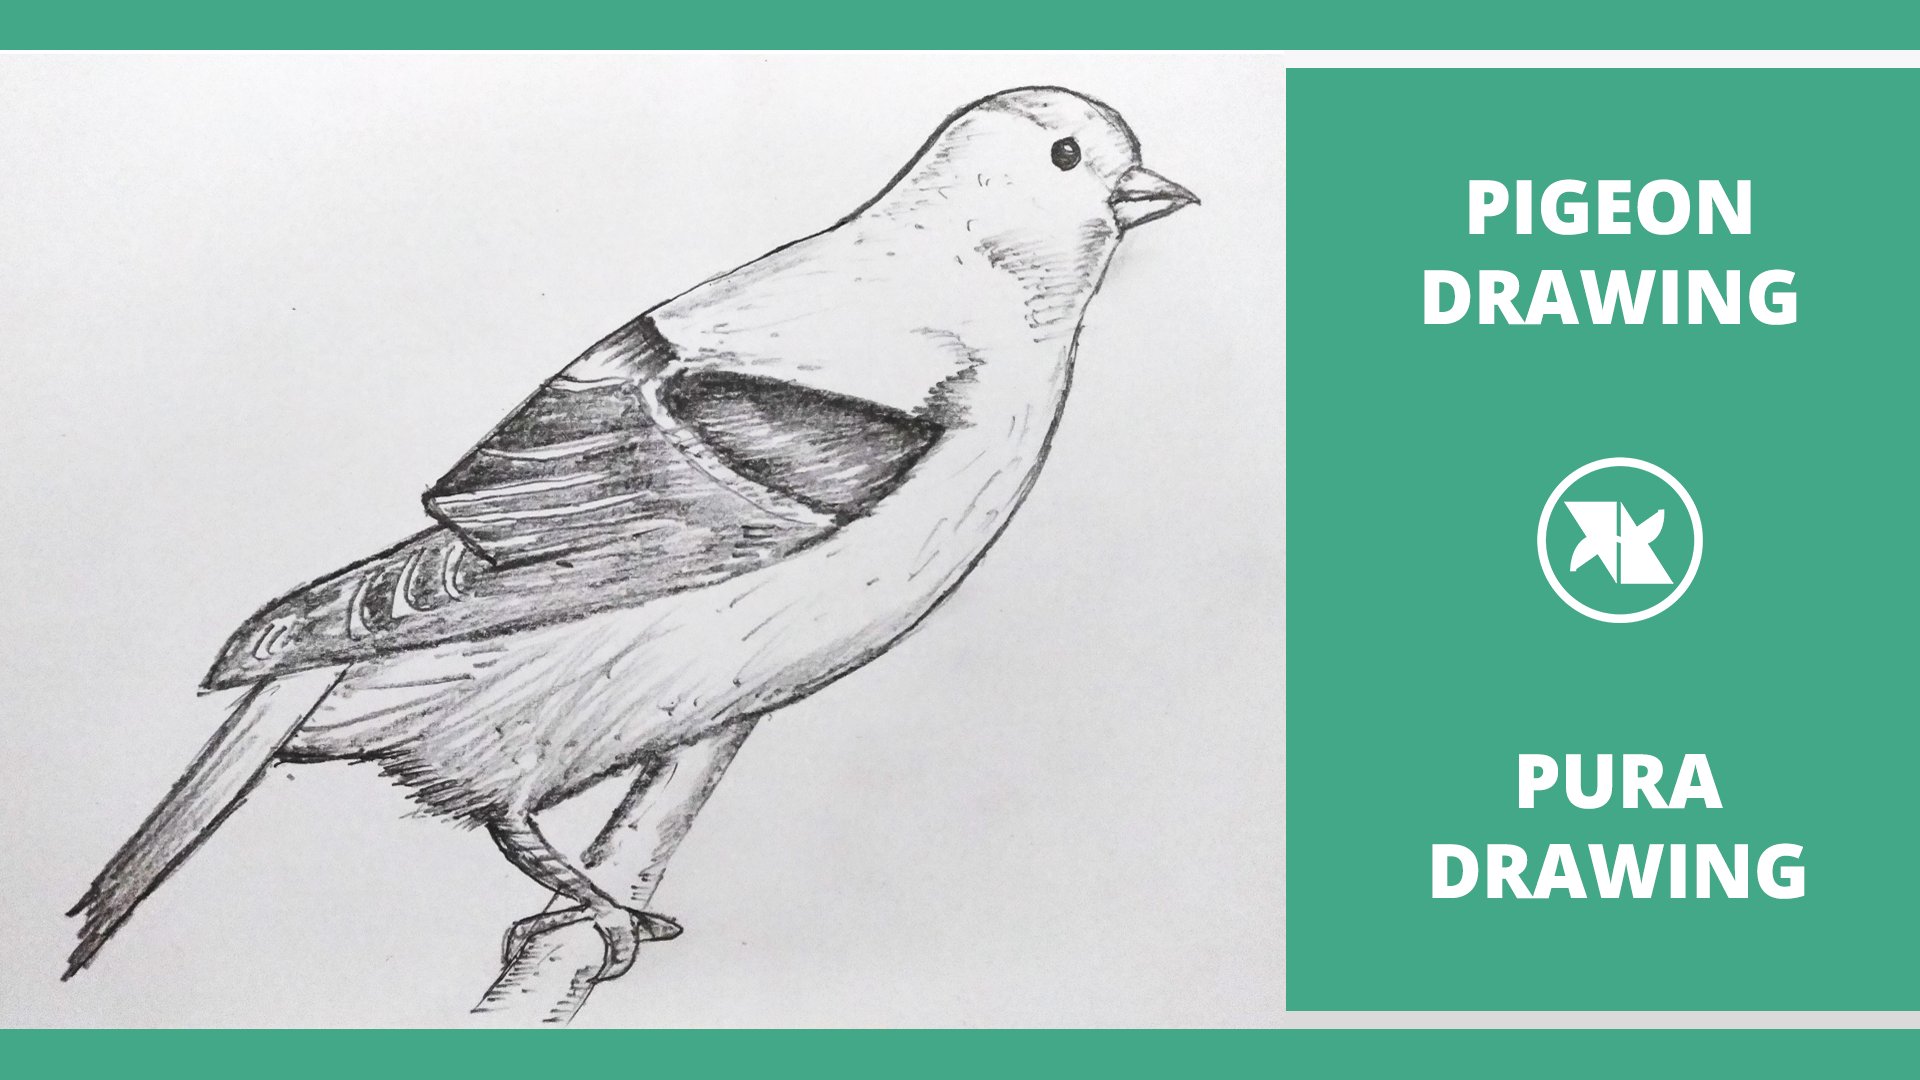 How to Draw Pigeon in Flight (Birds for Kids) Step by Step |  DrawingTutorials101.com